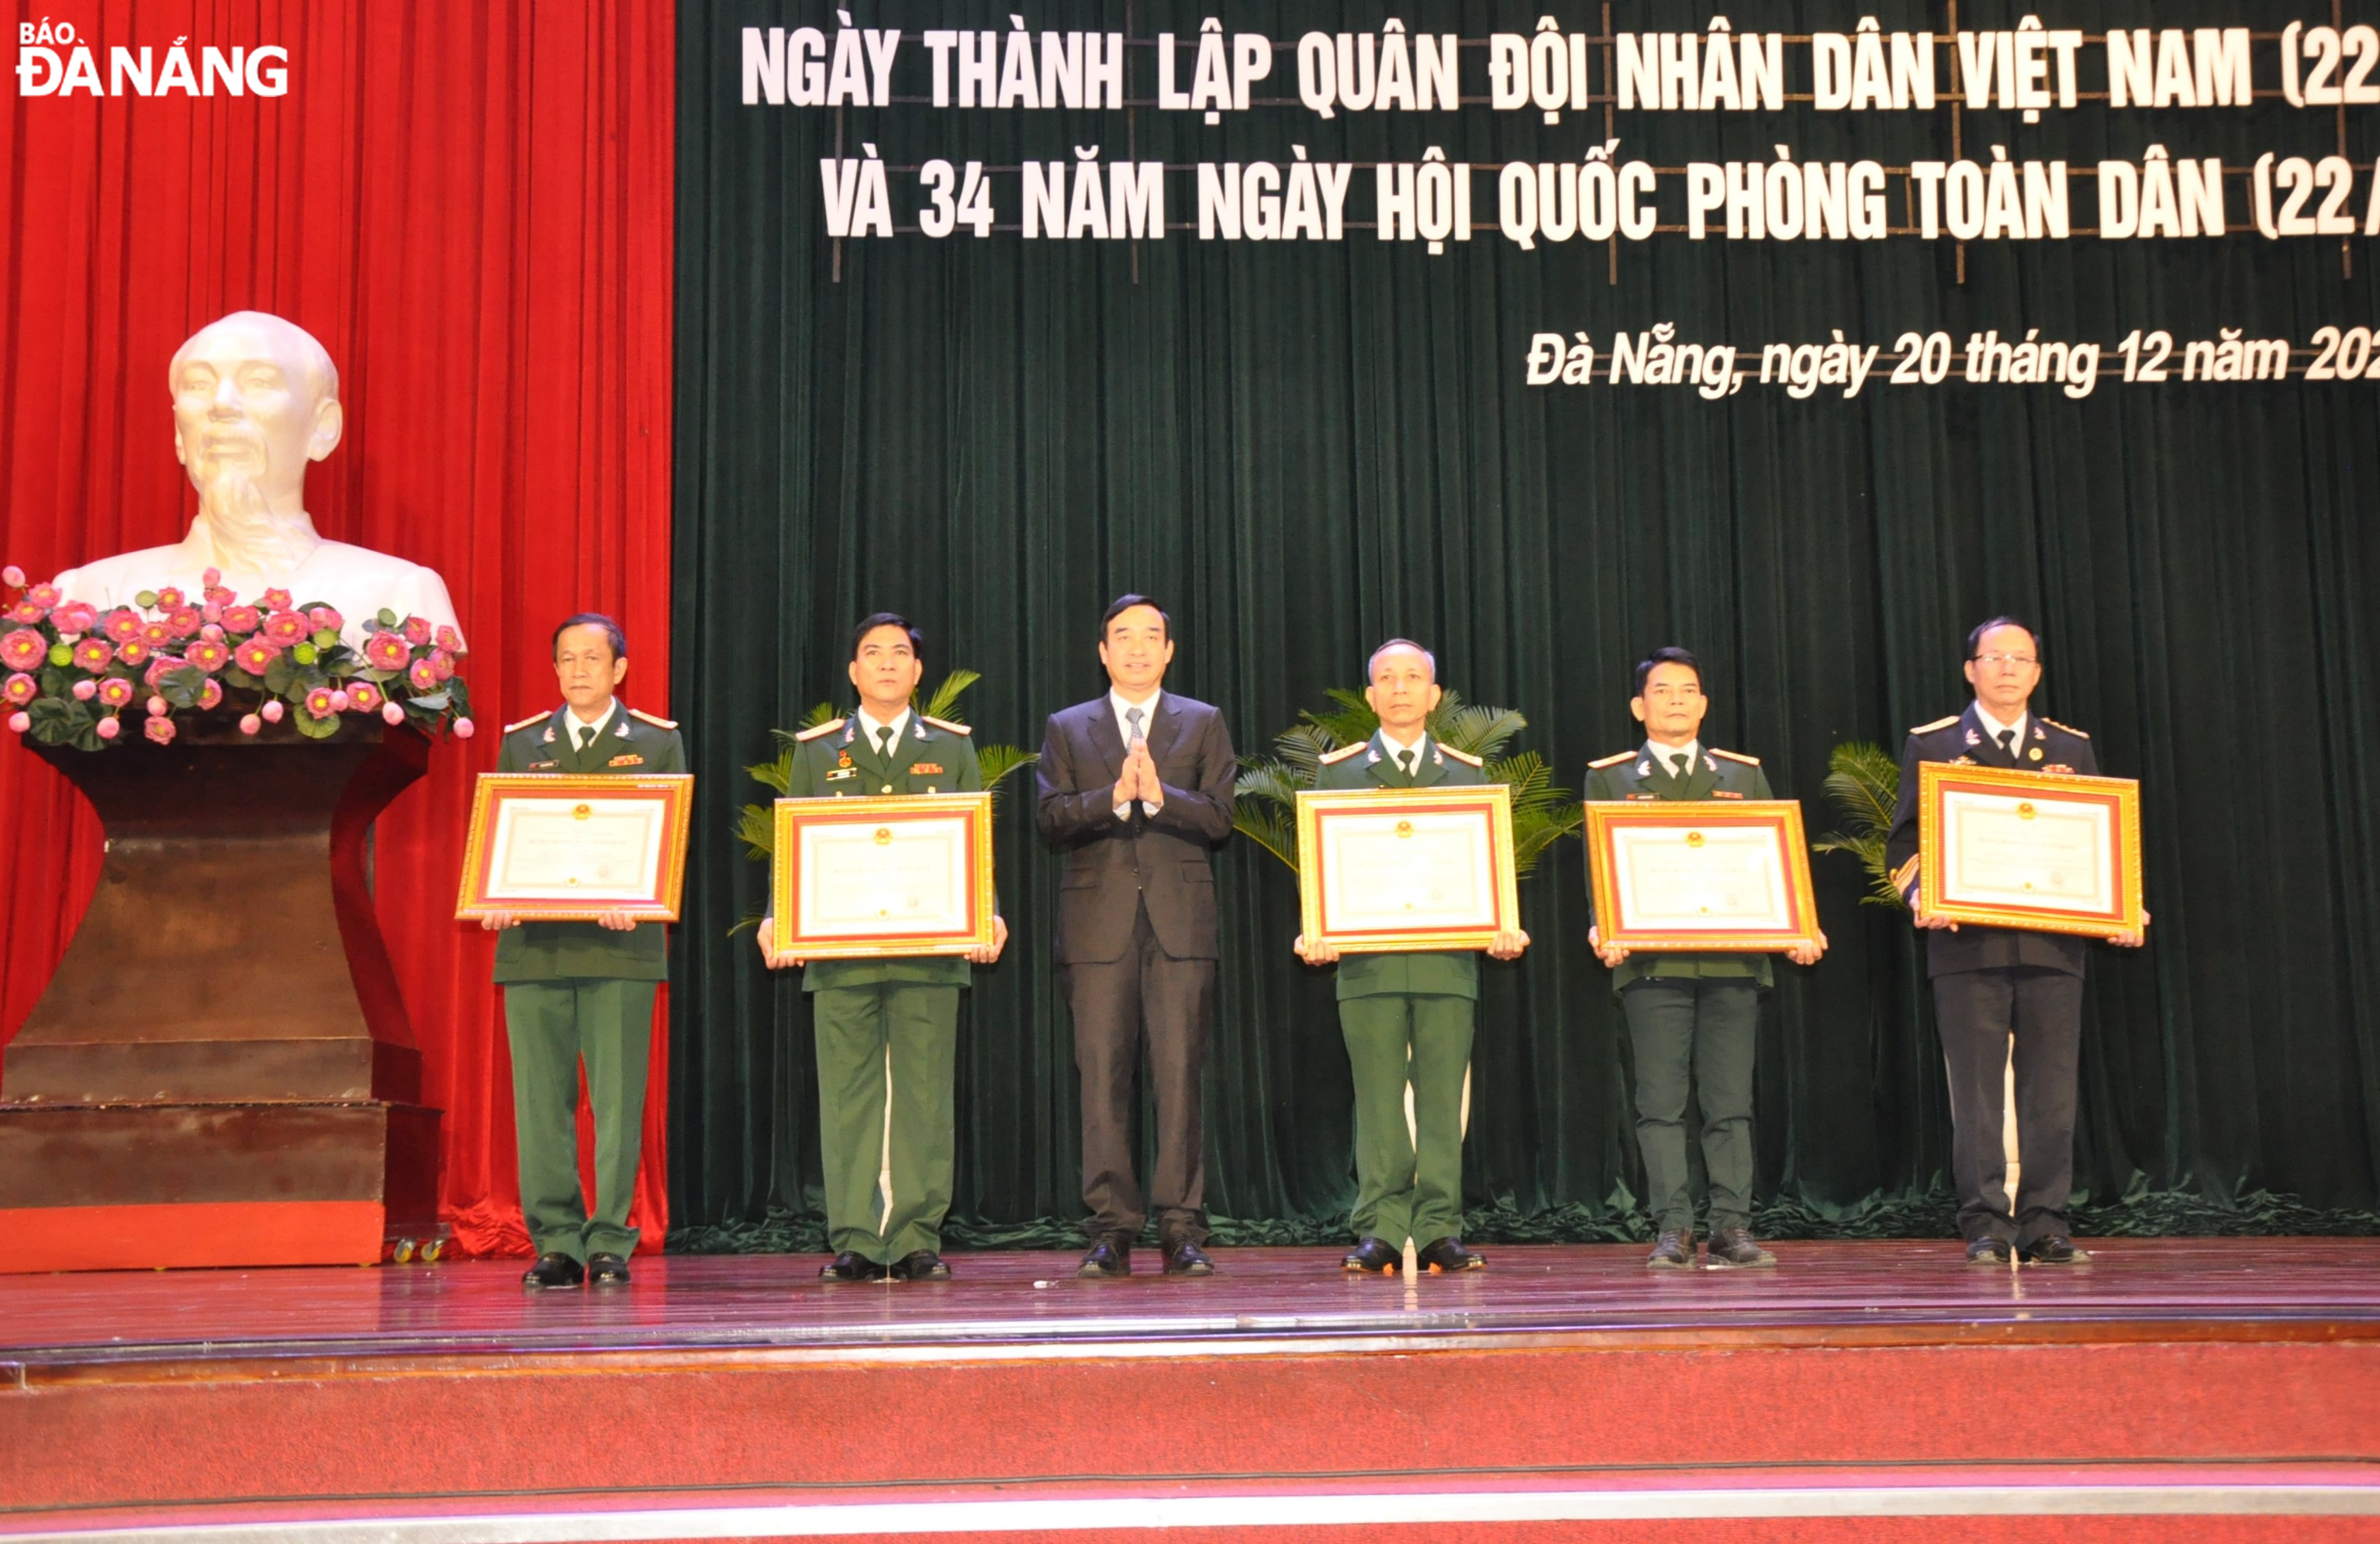 Under the authorization of the State President, Chairman of the Da Nang People's Committee Le Trung Chinh (3rd, left) awarding the Second and Third-Class Fatherland Defence Medals to outstanding individuals. Photo: LE HUNG